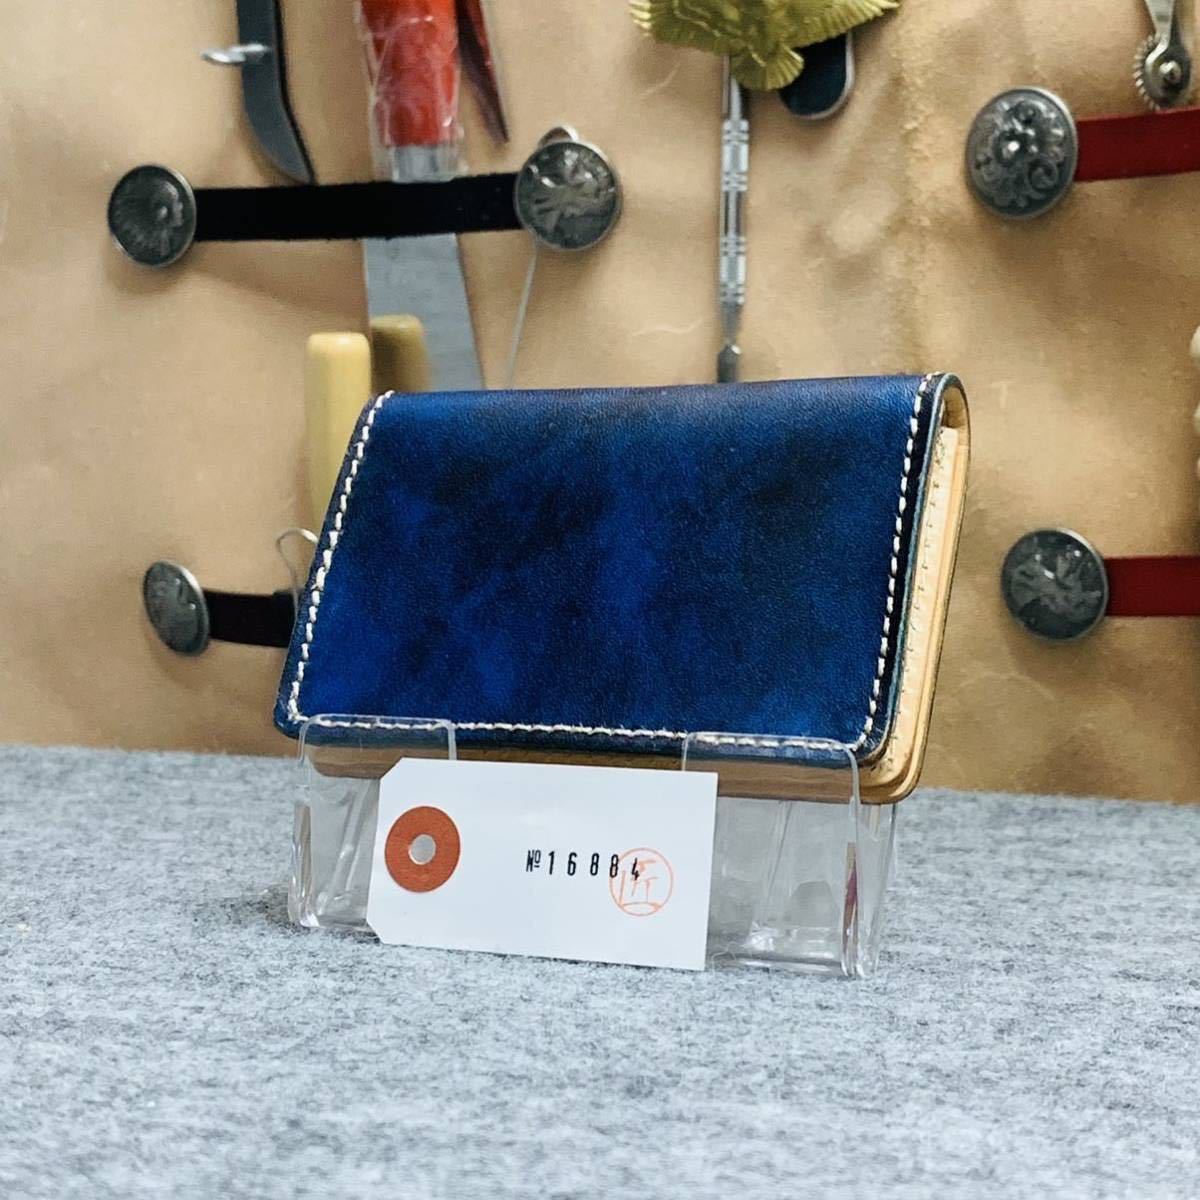  blue [ blue ] men's card-case card inserting ticket holder cow leather original leather card-case men's purse cow leather business 1 jpy free shipping Advan leather 